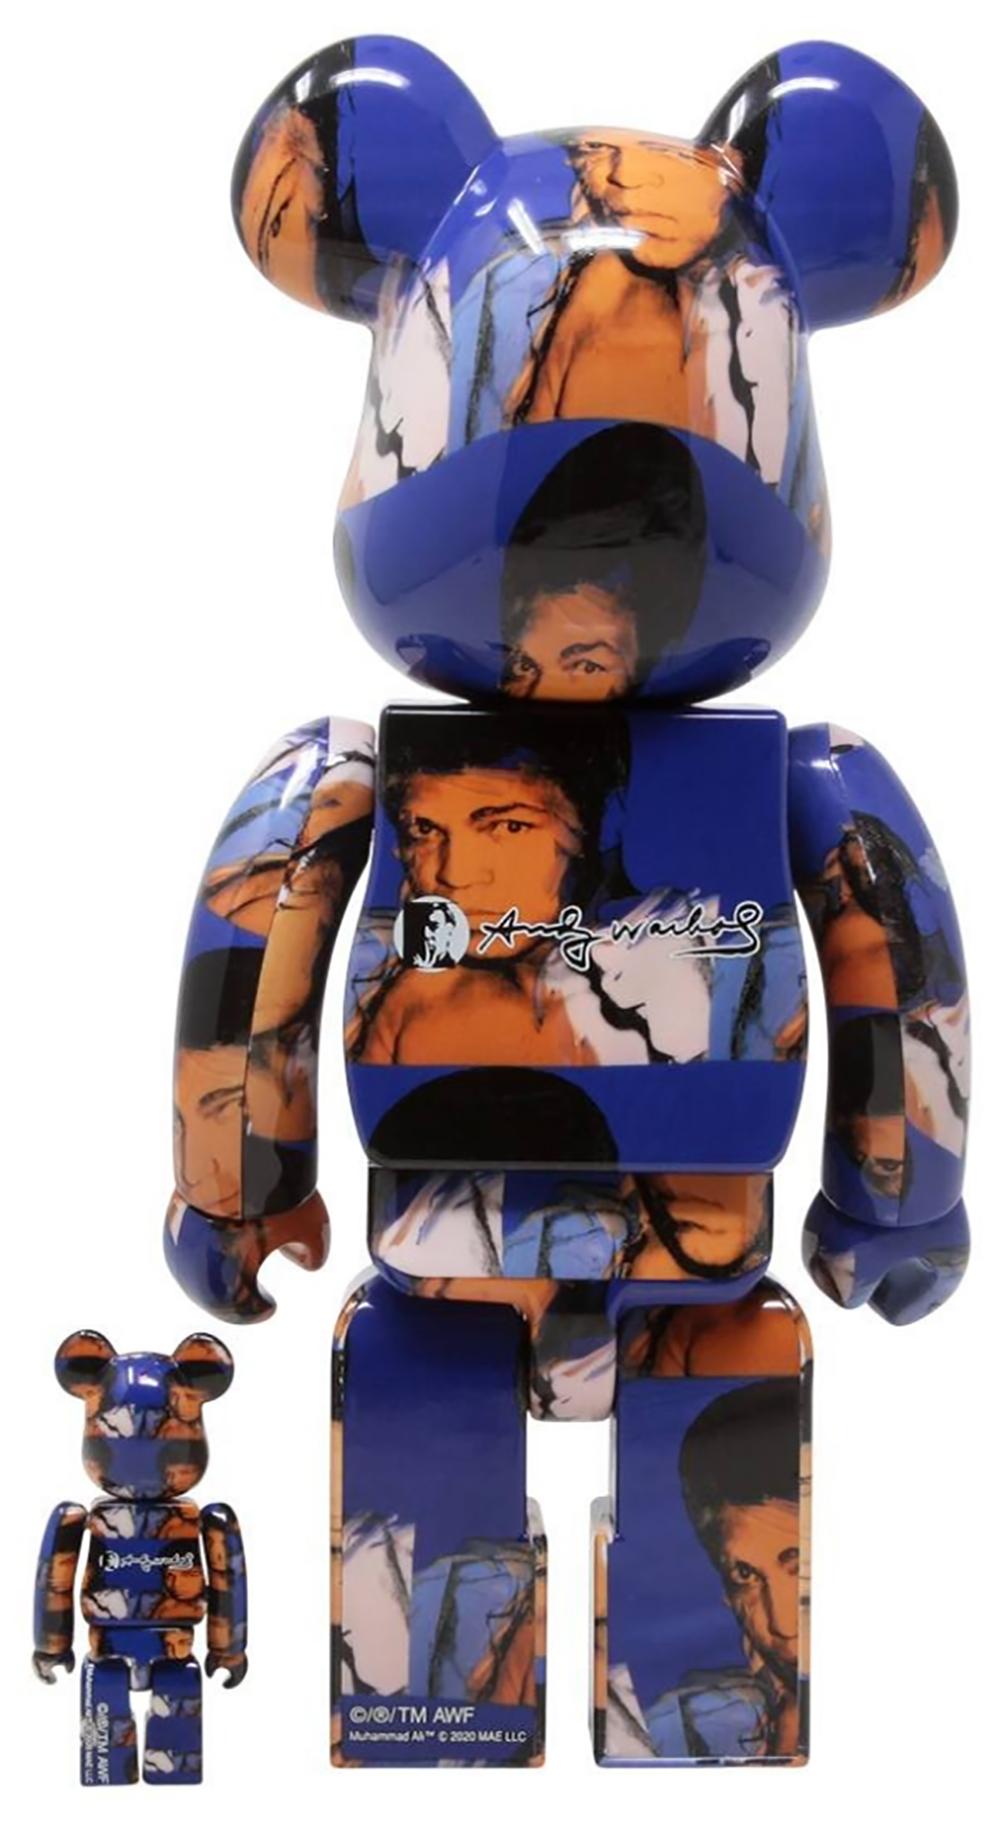  Andy Warhol Muhammad Ali Bearbrick 400% (Warhol Be@rbrick) - Sculpture by (after) Andy Warhol